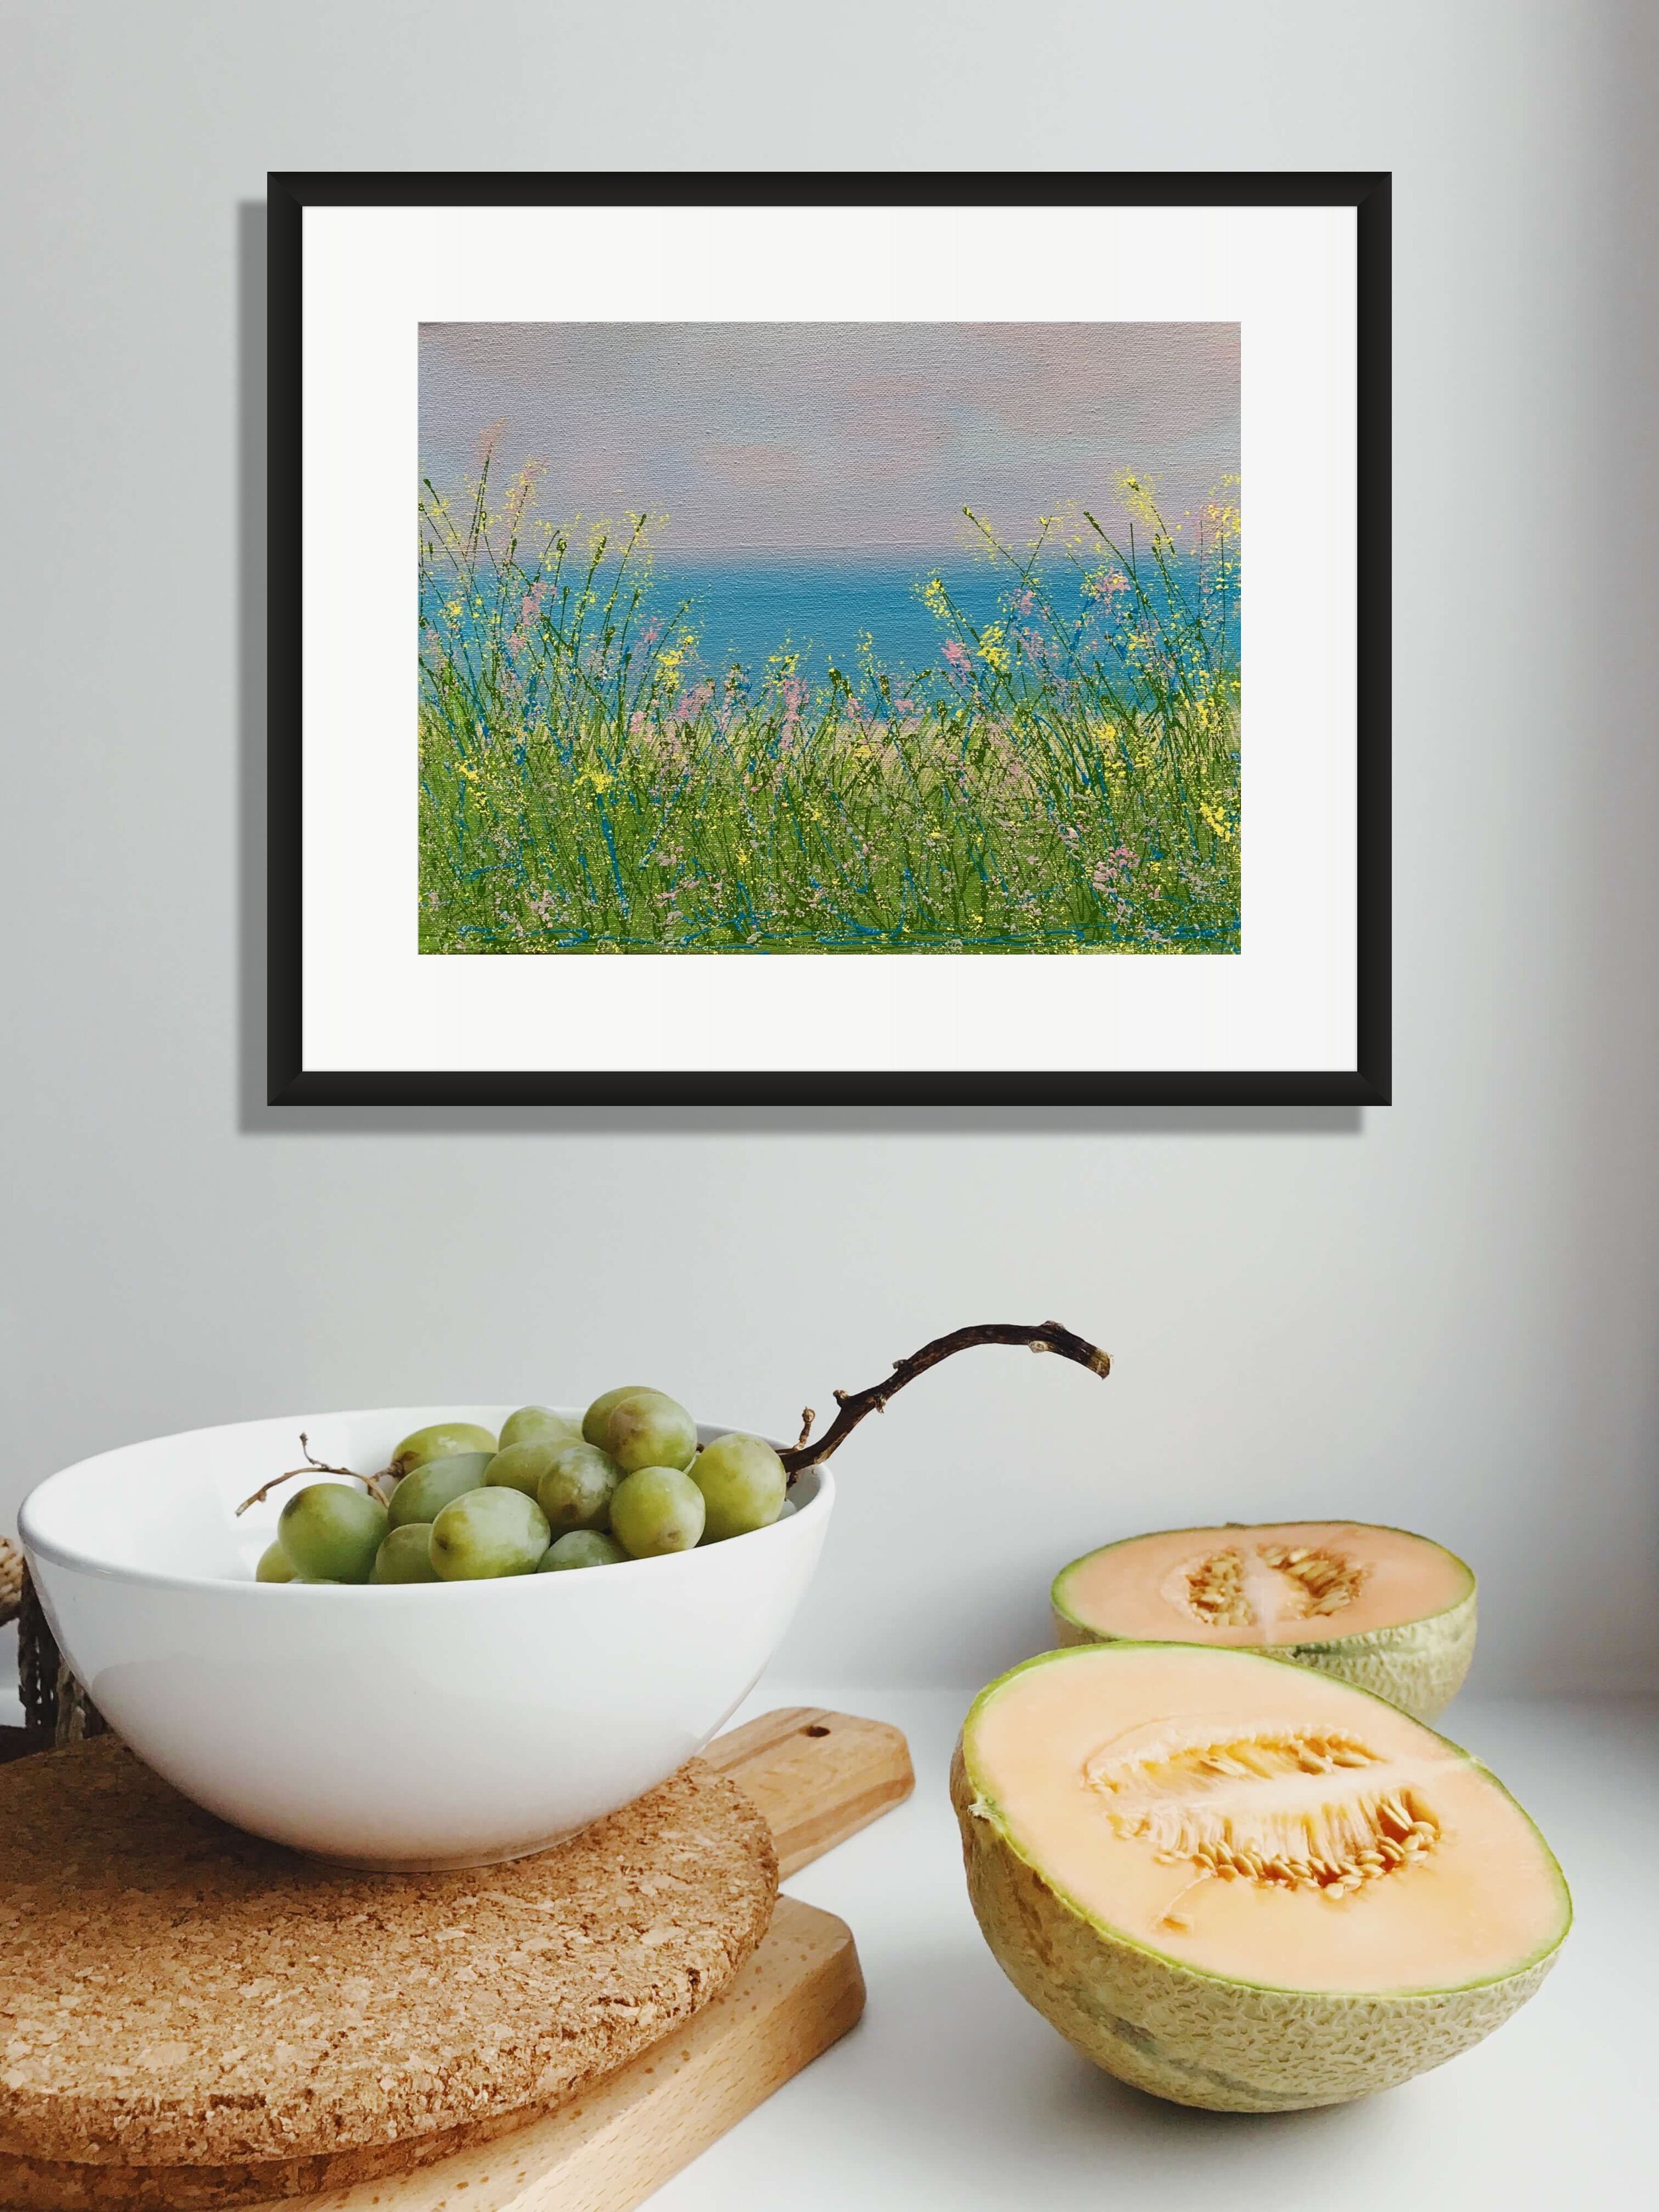 Great Lakes painting above fruit on table.jpg